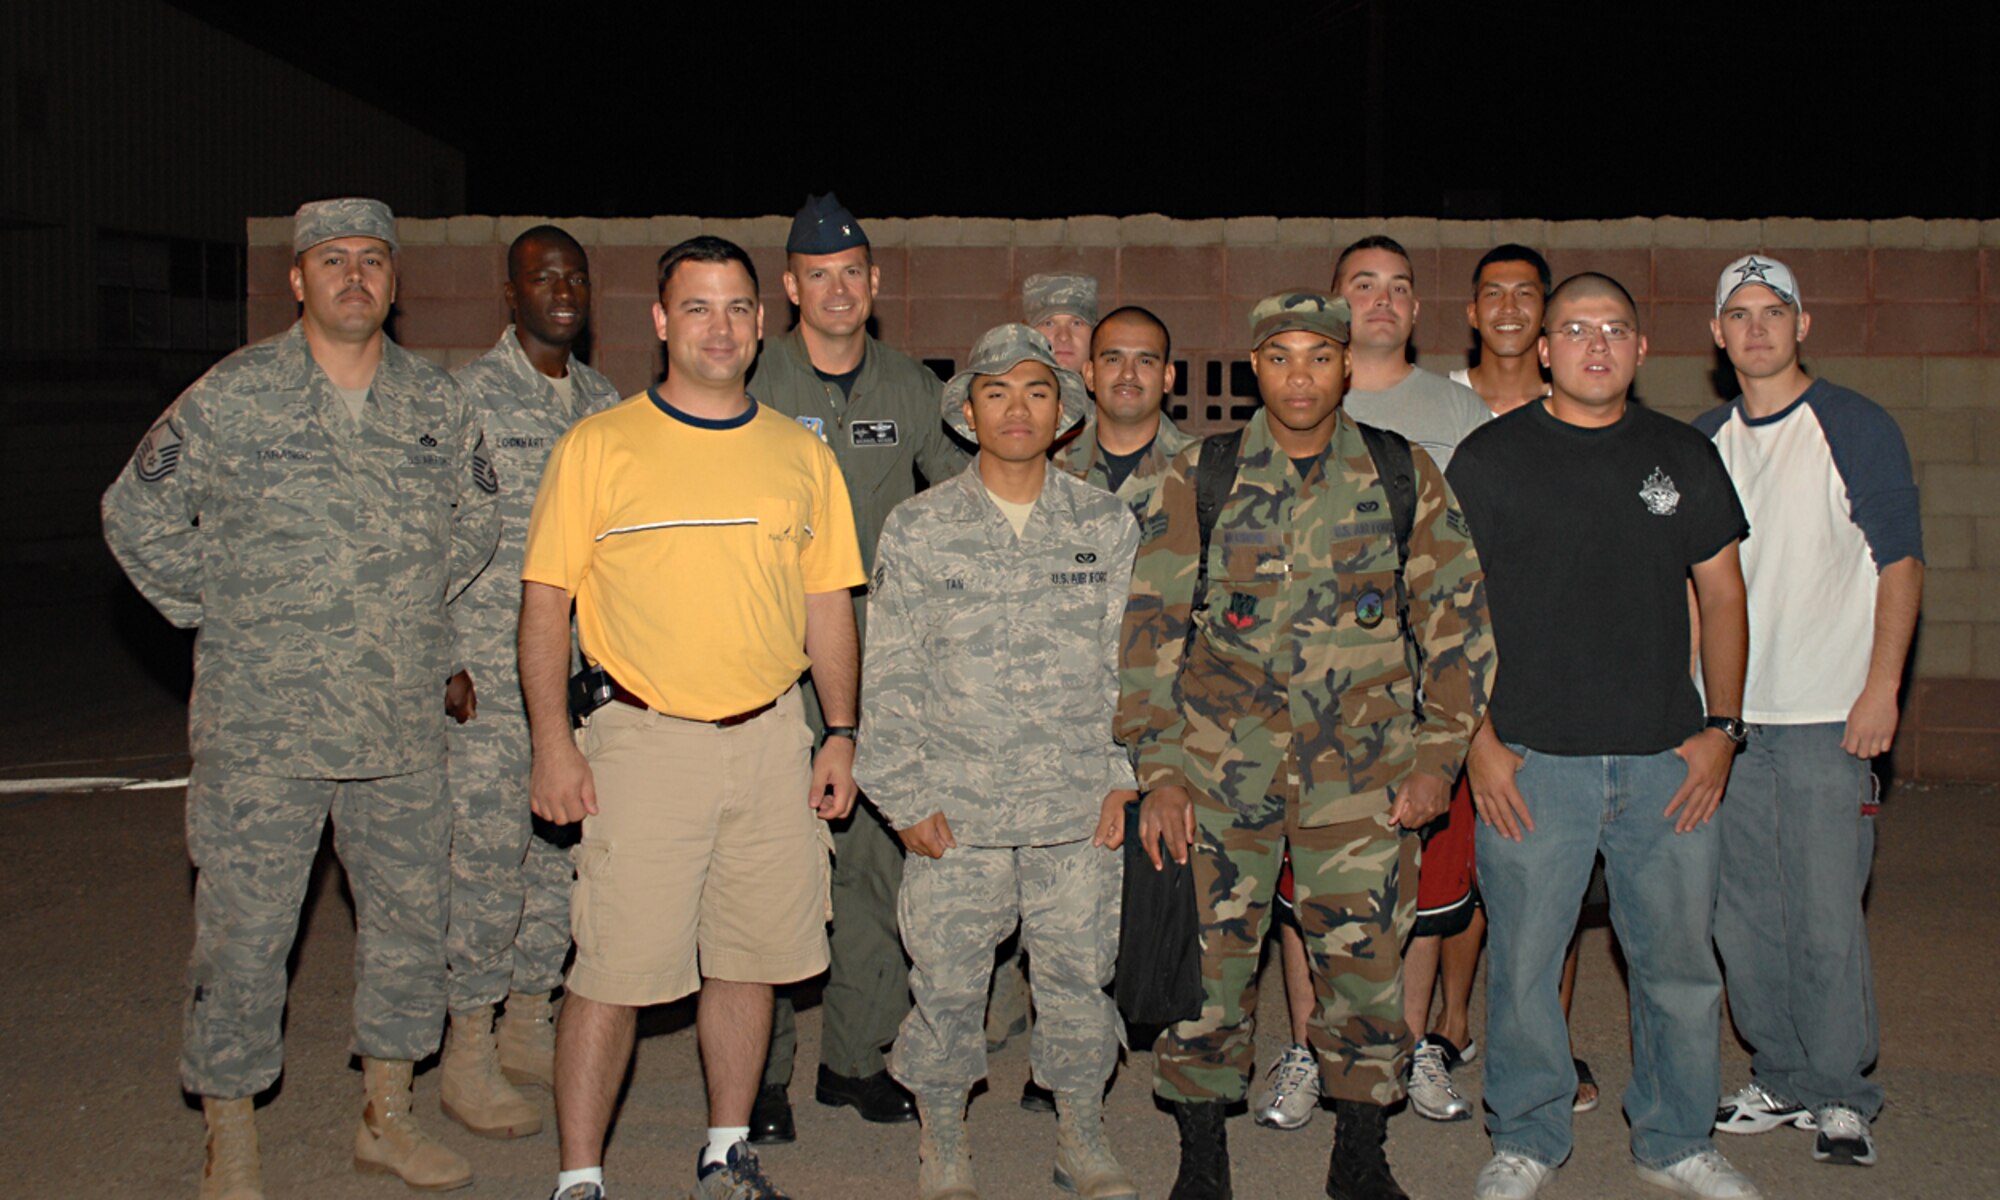 Senior Airman Ralph Lauren Tan, 49th Civil Engineer Squadron, poses with members of his squadron at Holloman Air Force Base, N.M., October 8. Airman Tan was deployed for five months to Camp Speicher, Iraq with the 823rd Rapid Engineers Deployable Heavy Operations Repair Squadron Engineers. (U.S. Air Force photo/ Senior Airman Tiffany Trojca)